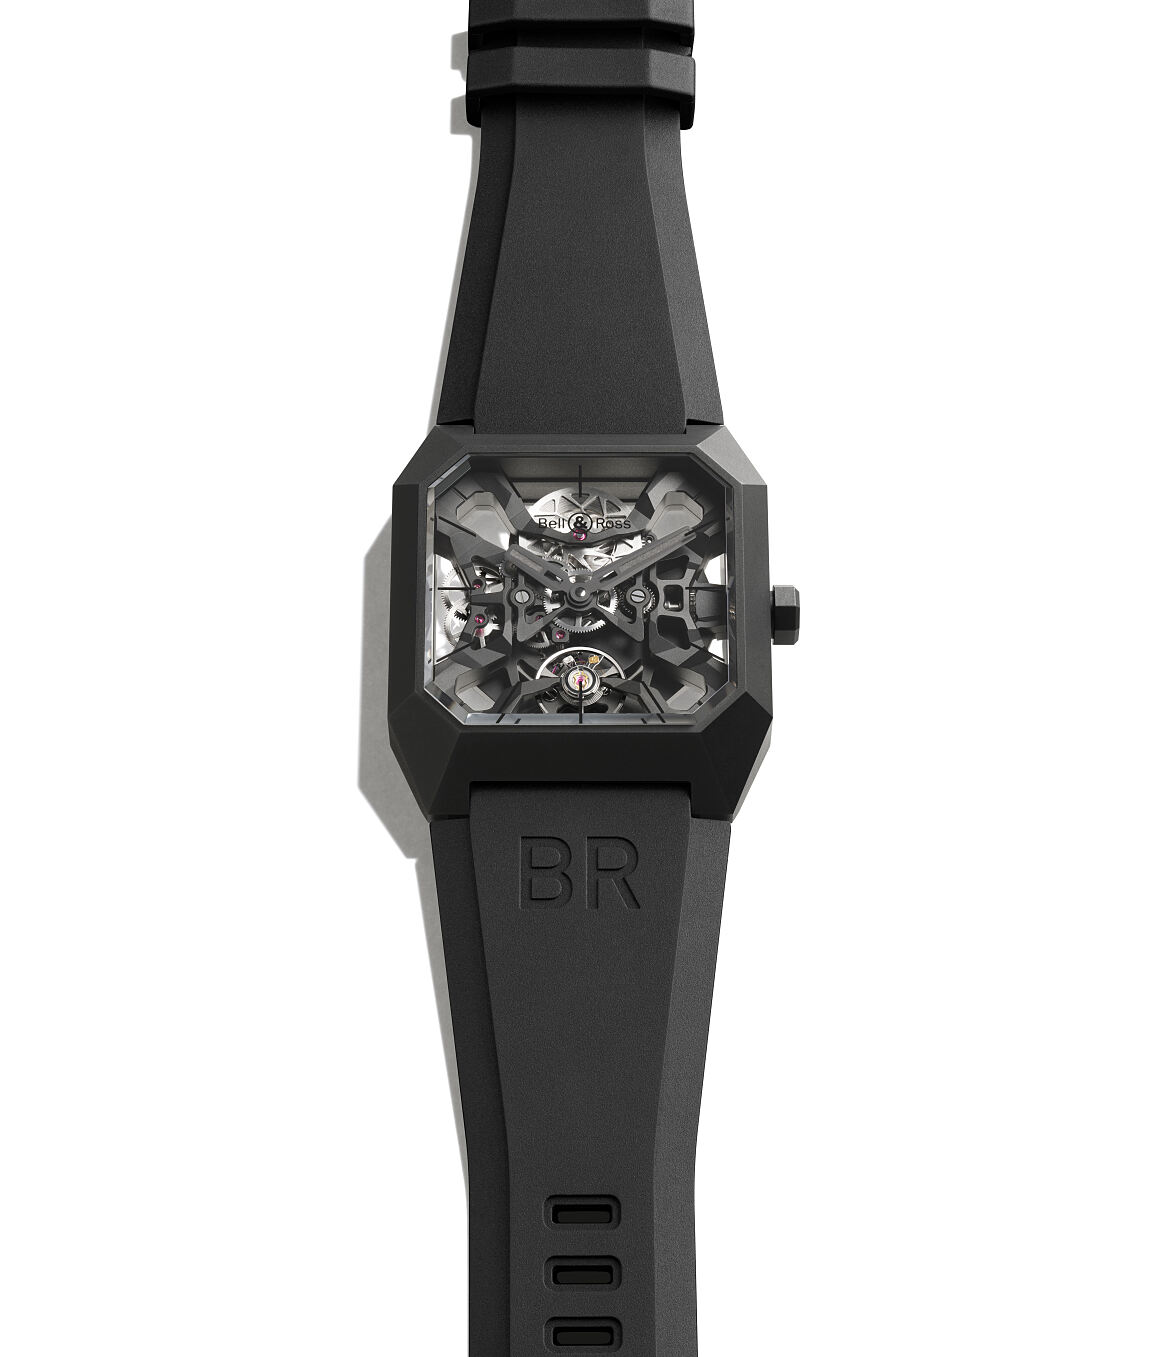 Bell&Ross_BR-03-CYBER-CERAMIC-PERS_EUR 13.600